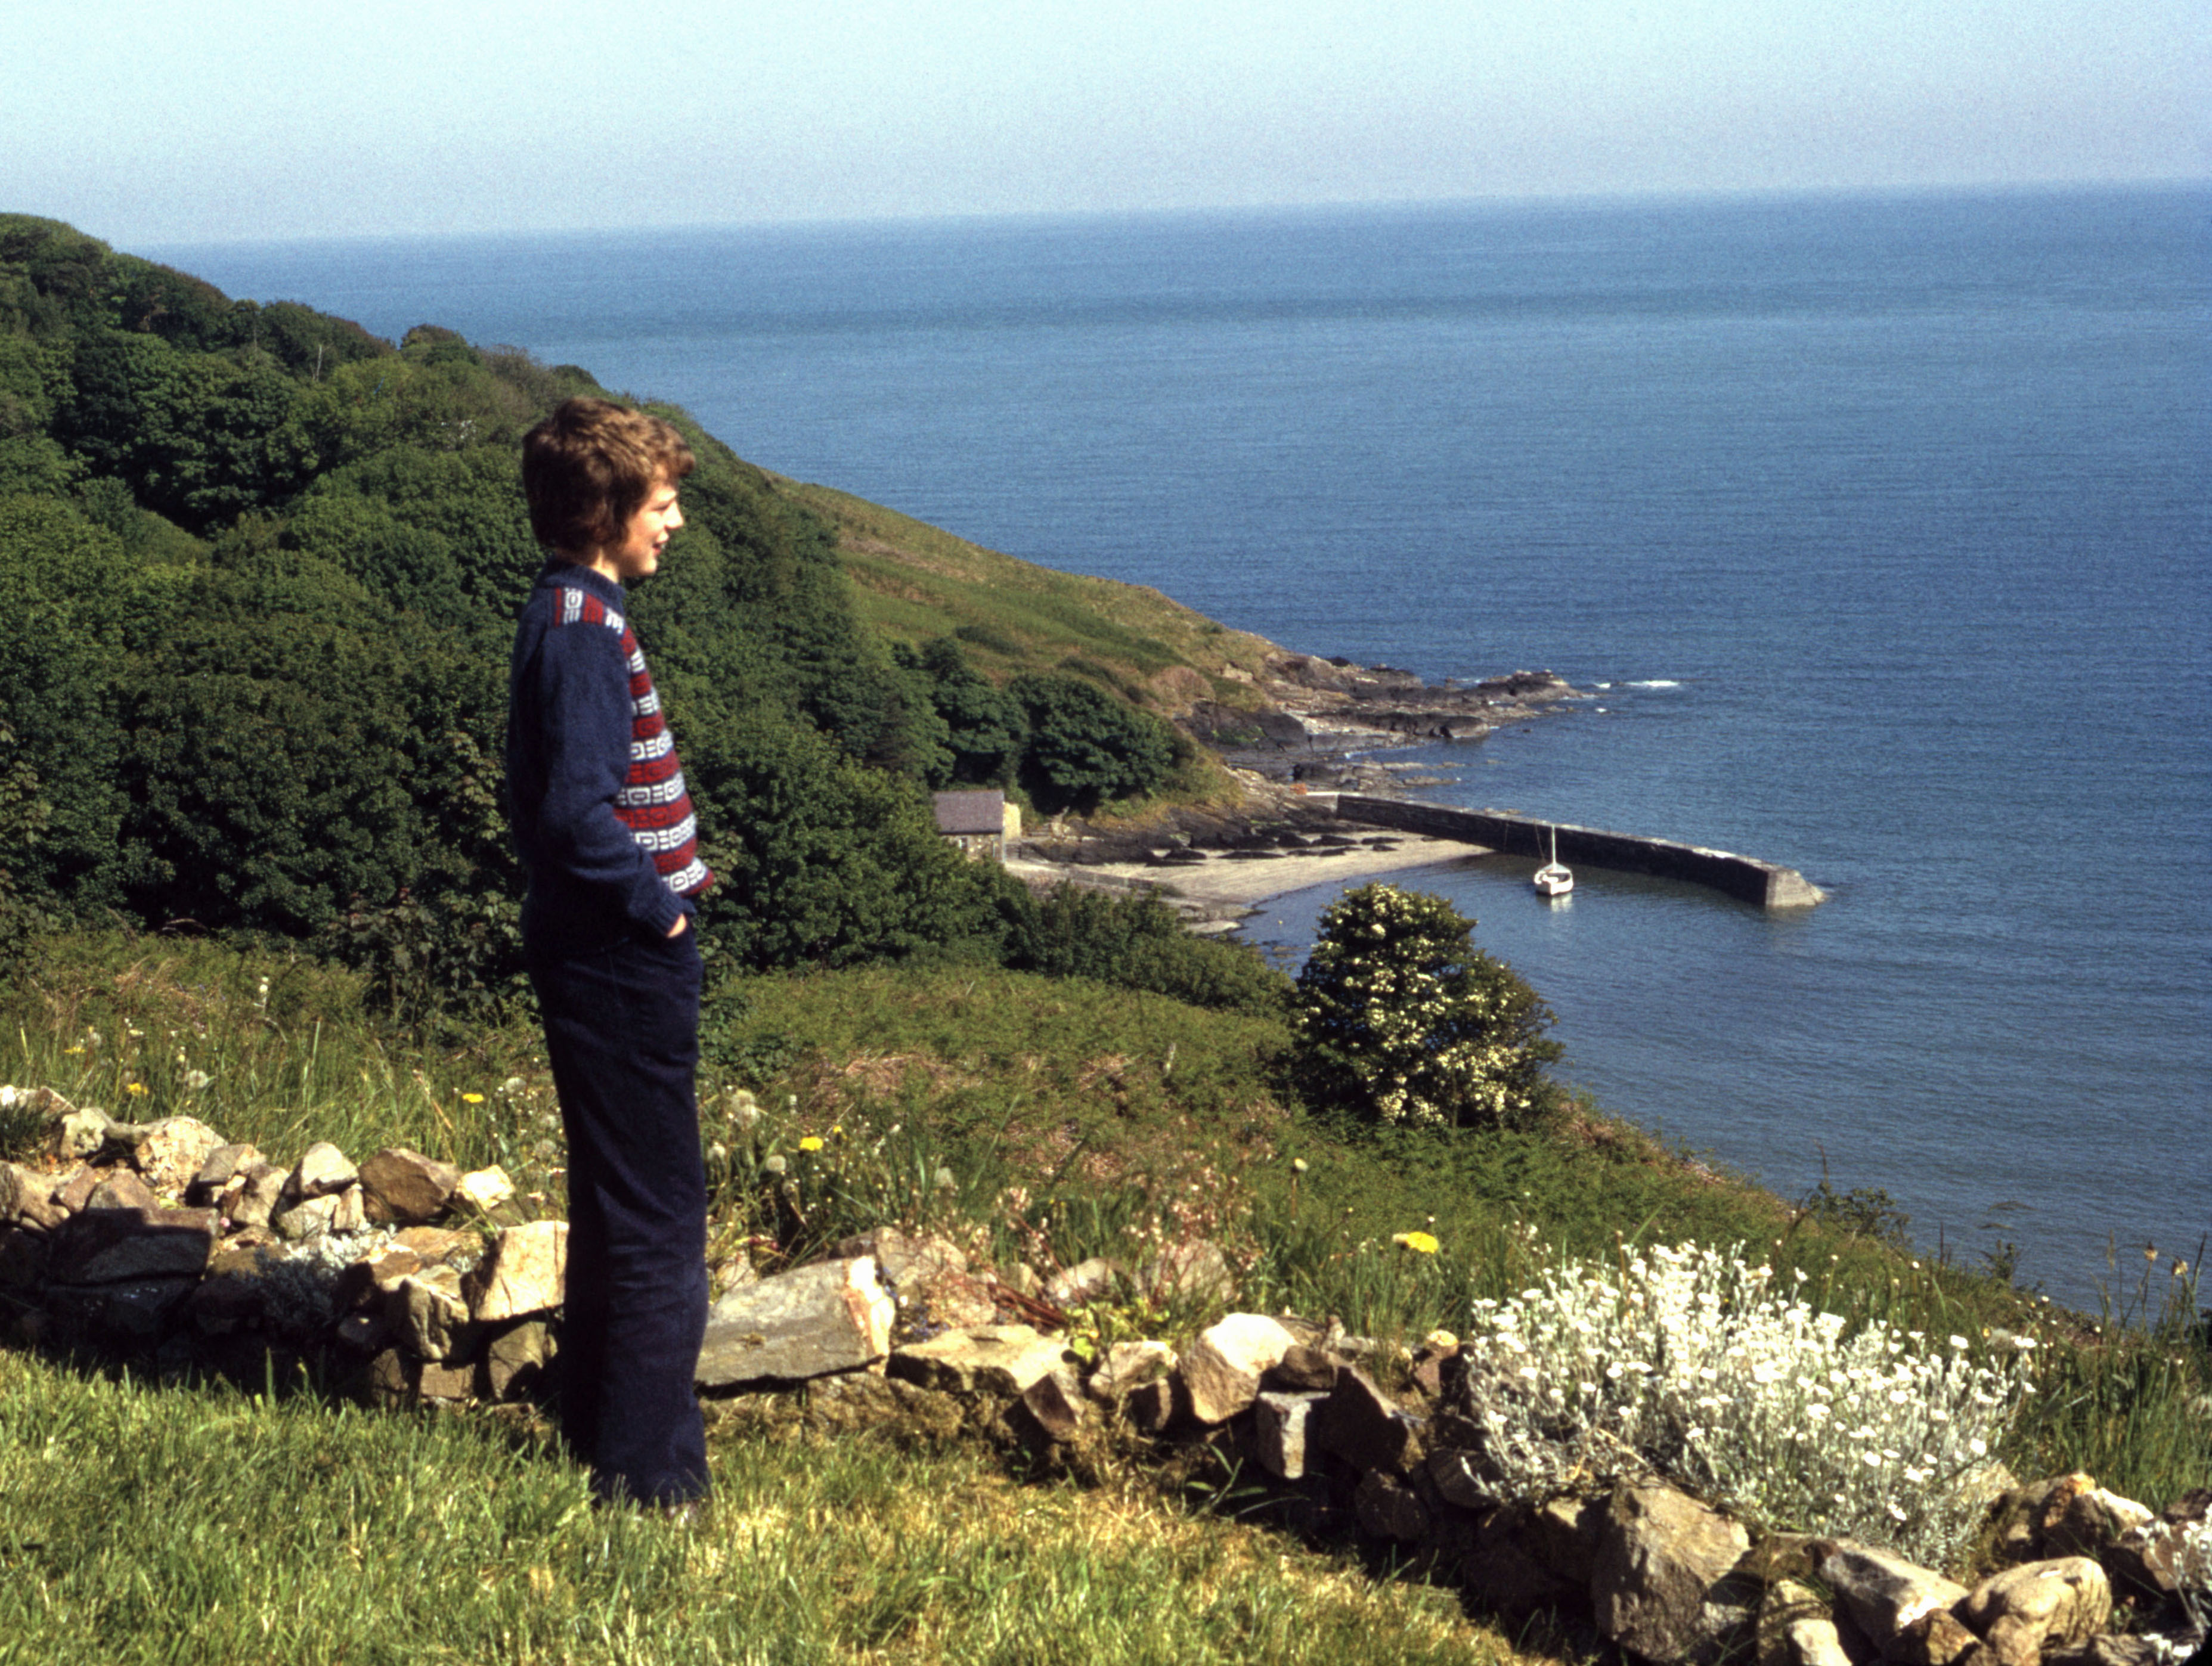 7505304 May 1975 - Simon looks out over Cardigan Bay.